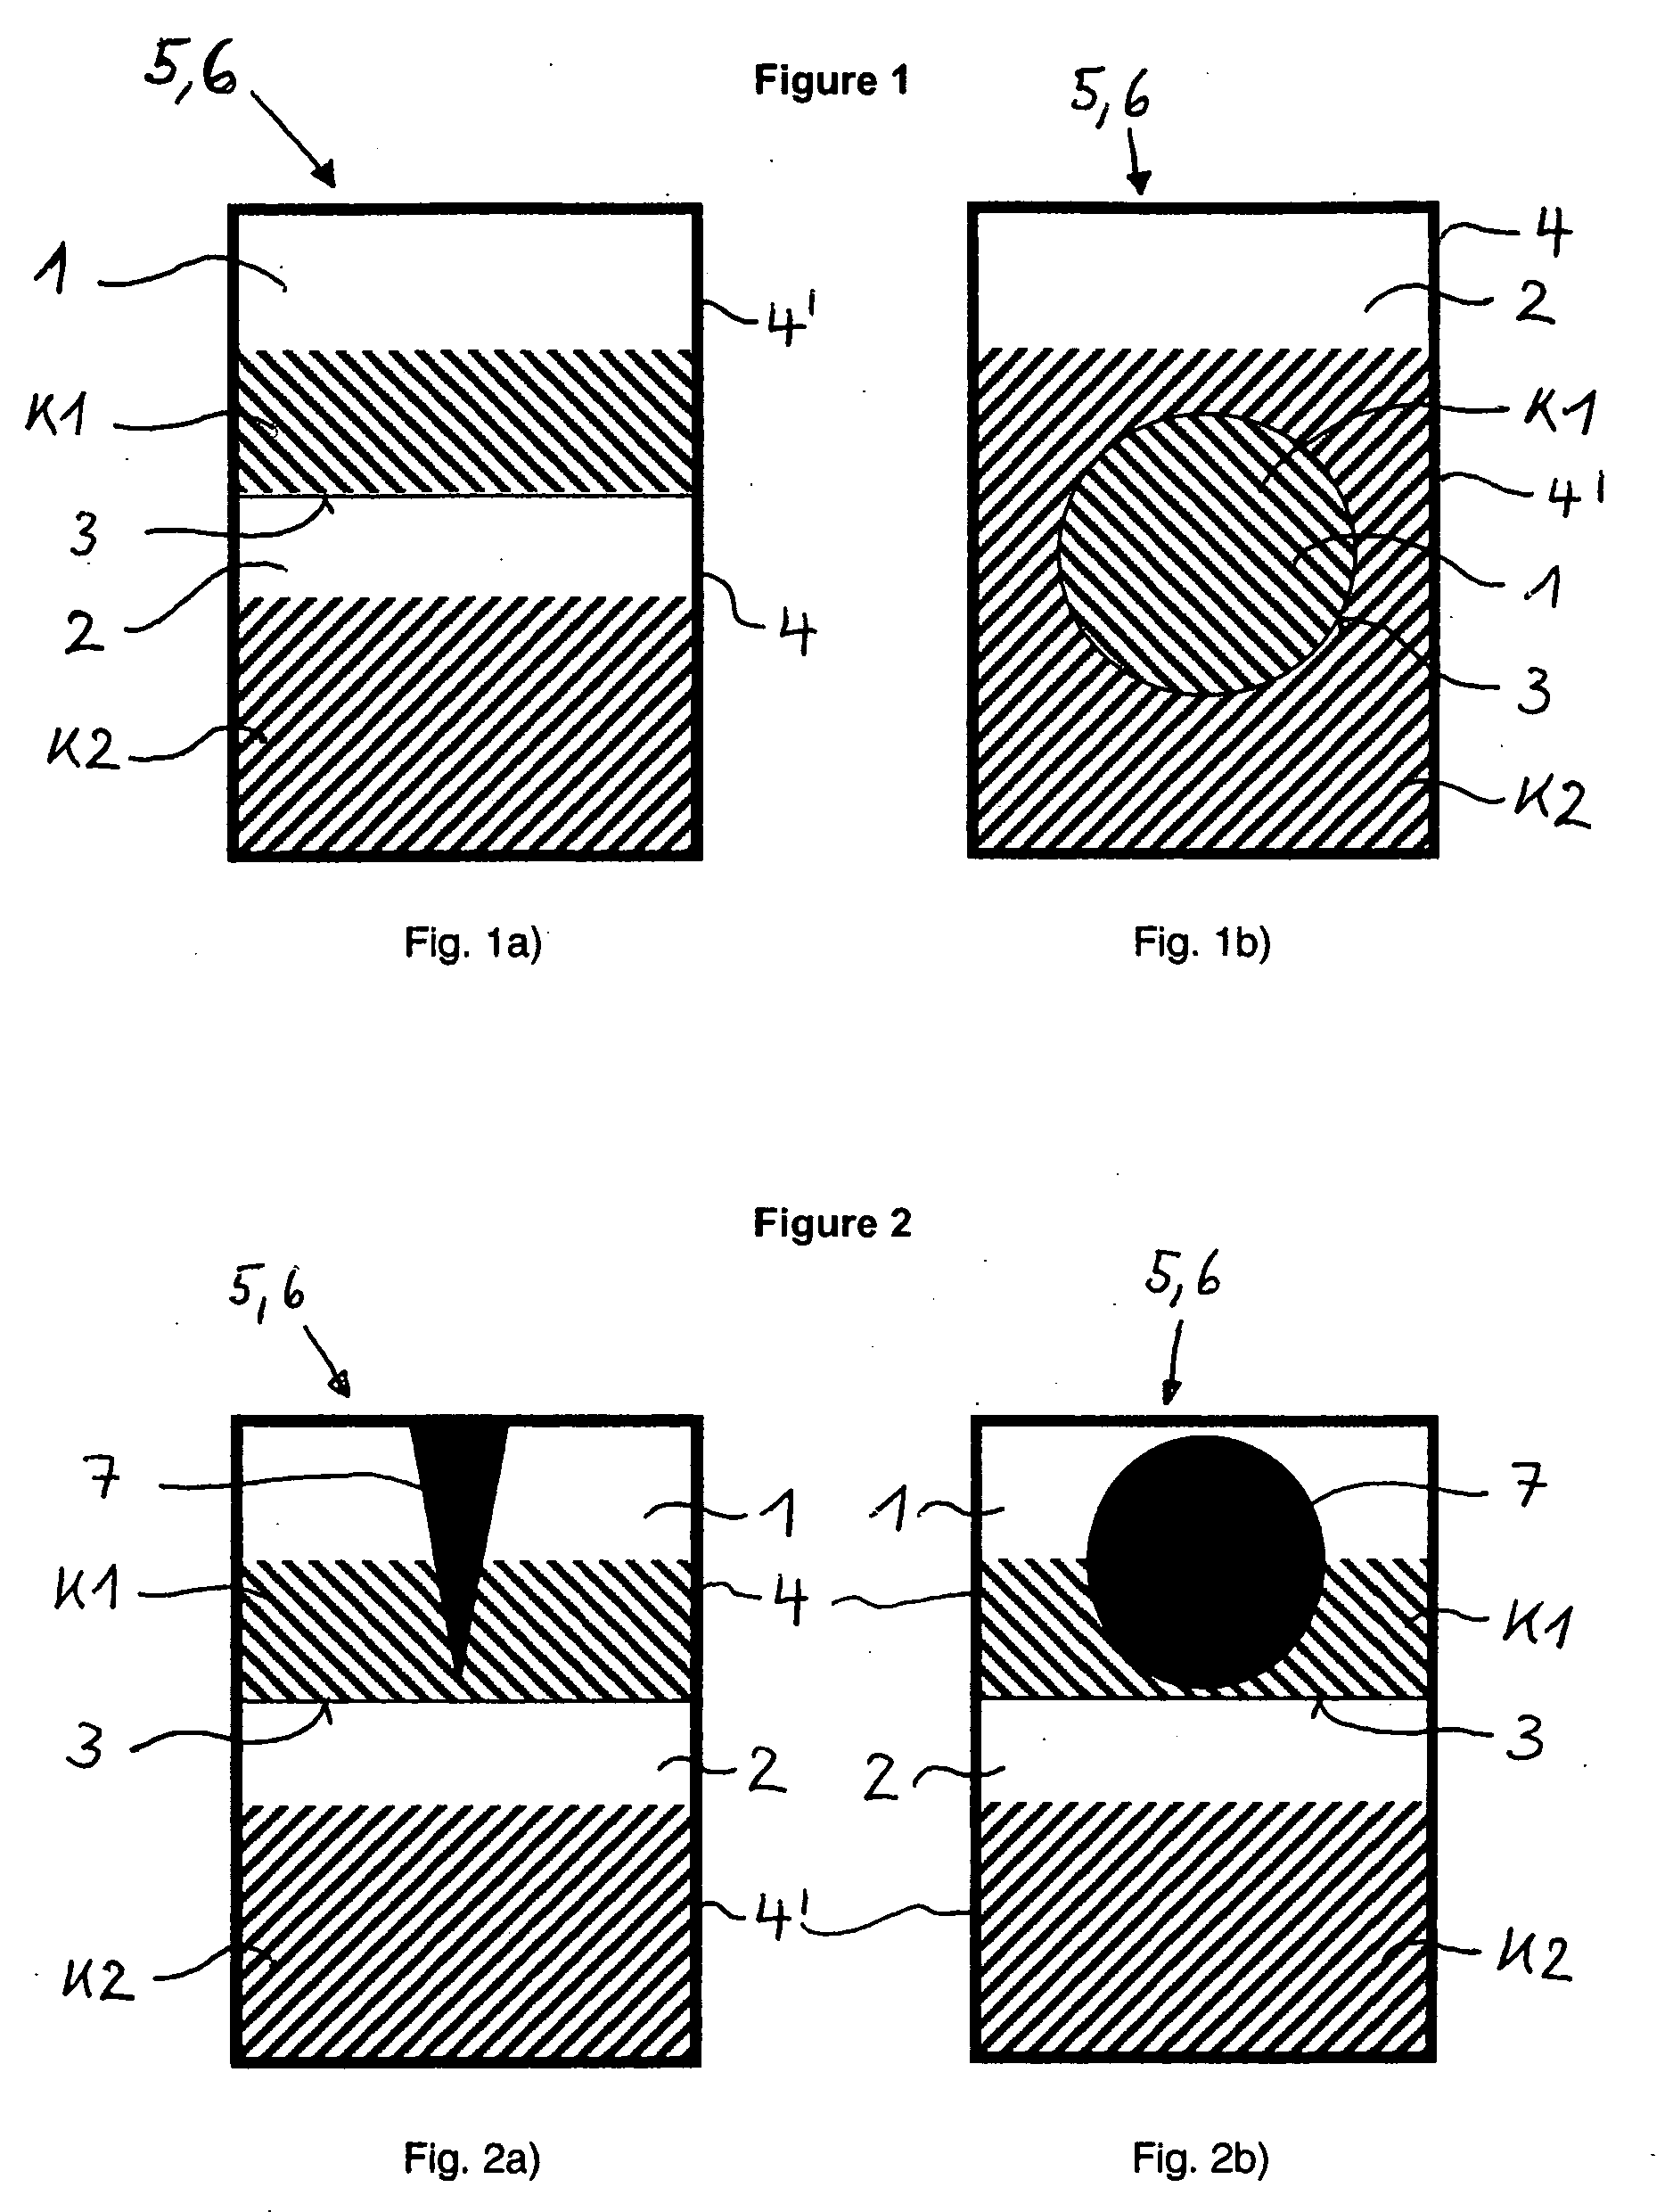 Two-component adhesion promoter composition and use of packaging comprising two compartments